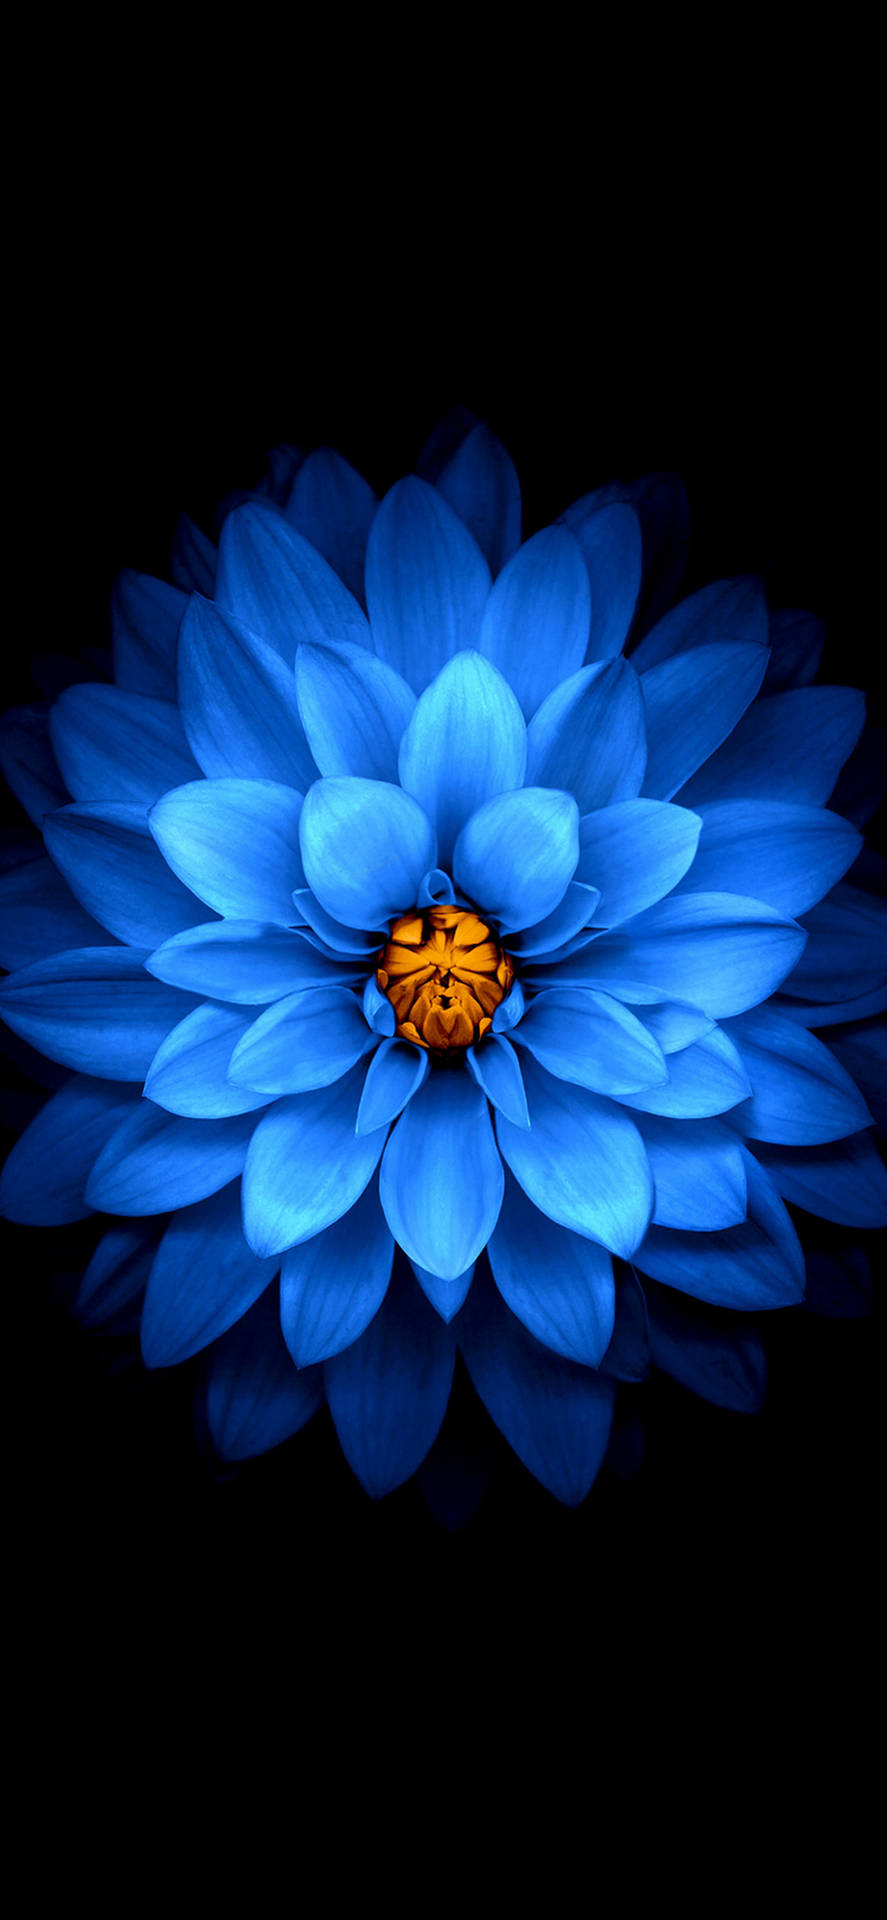 Iphone 11 Pro Max Blue Flower Background